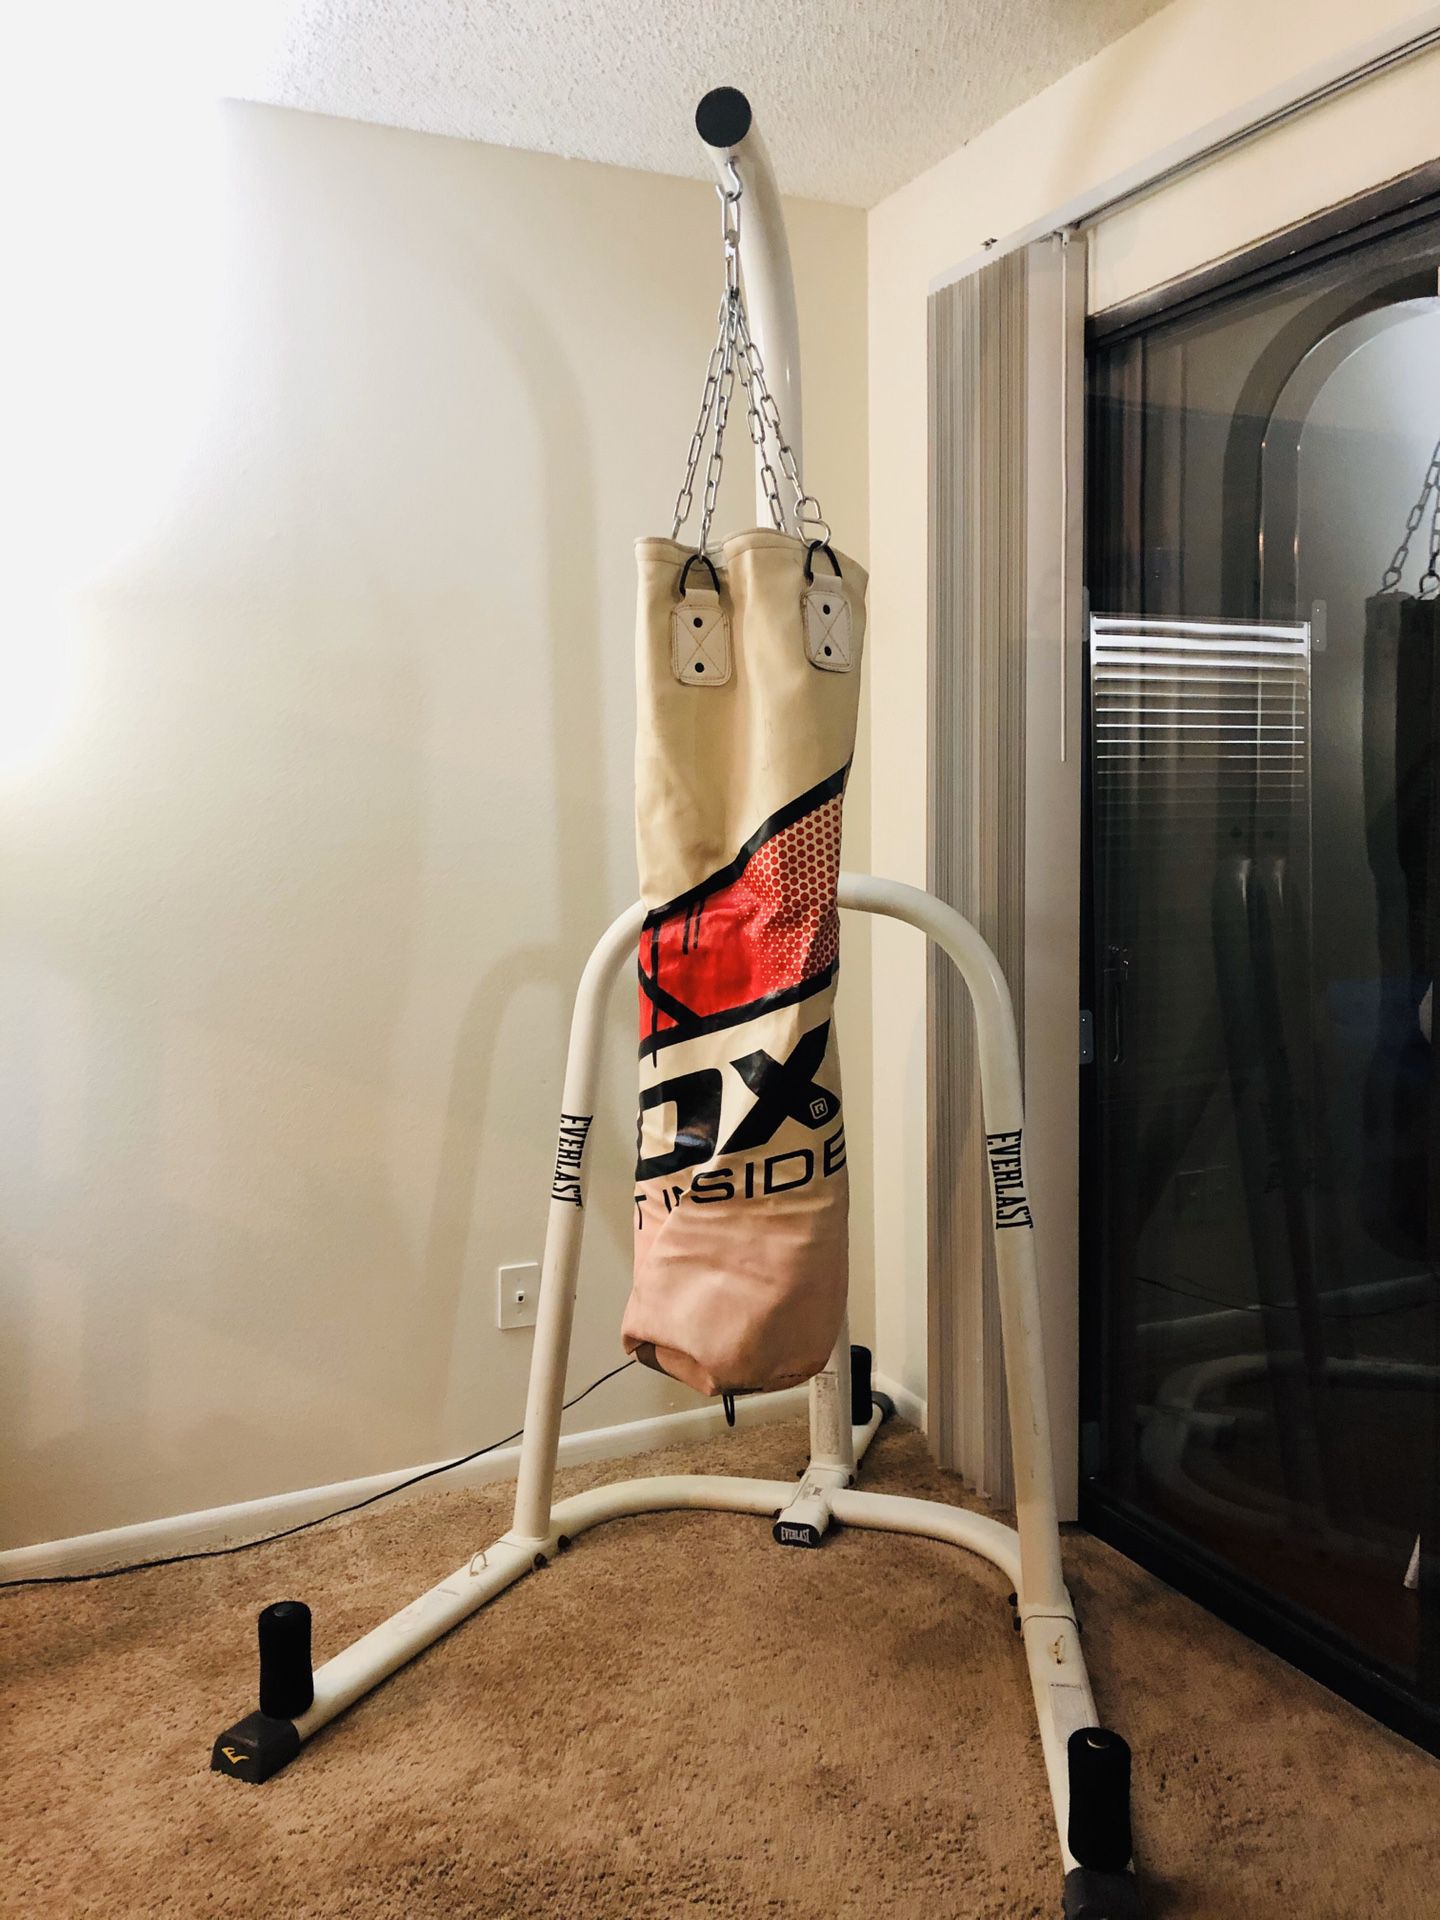 Everlast stand and punching bag